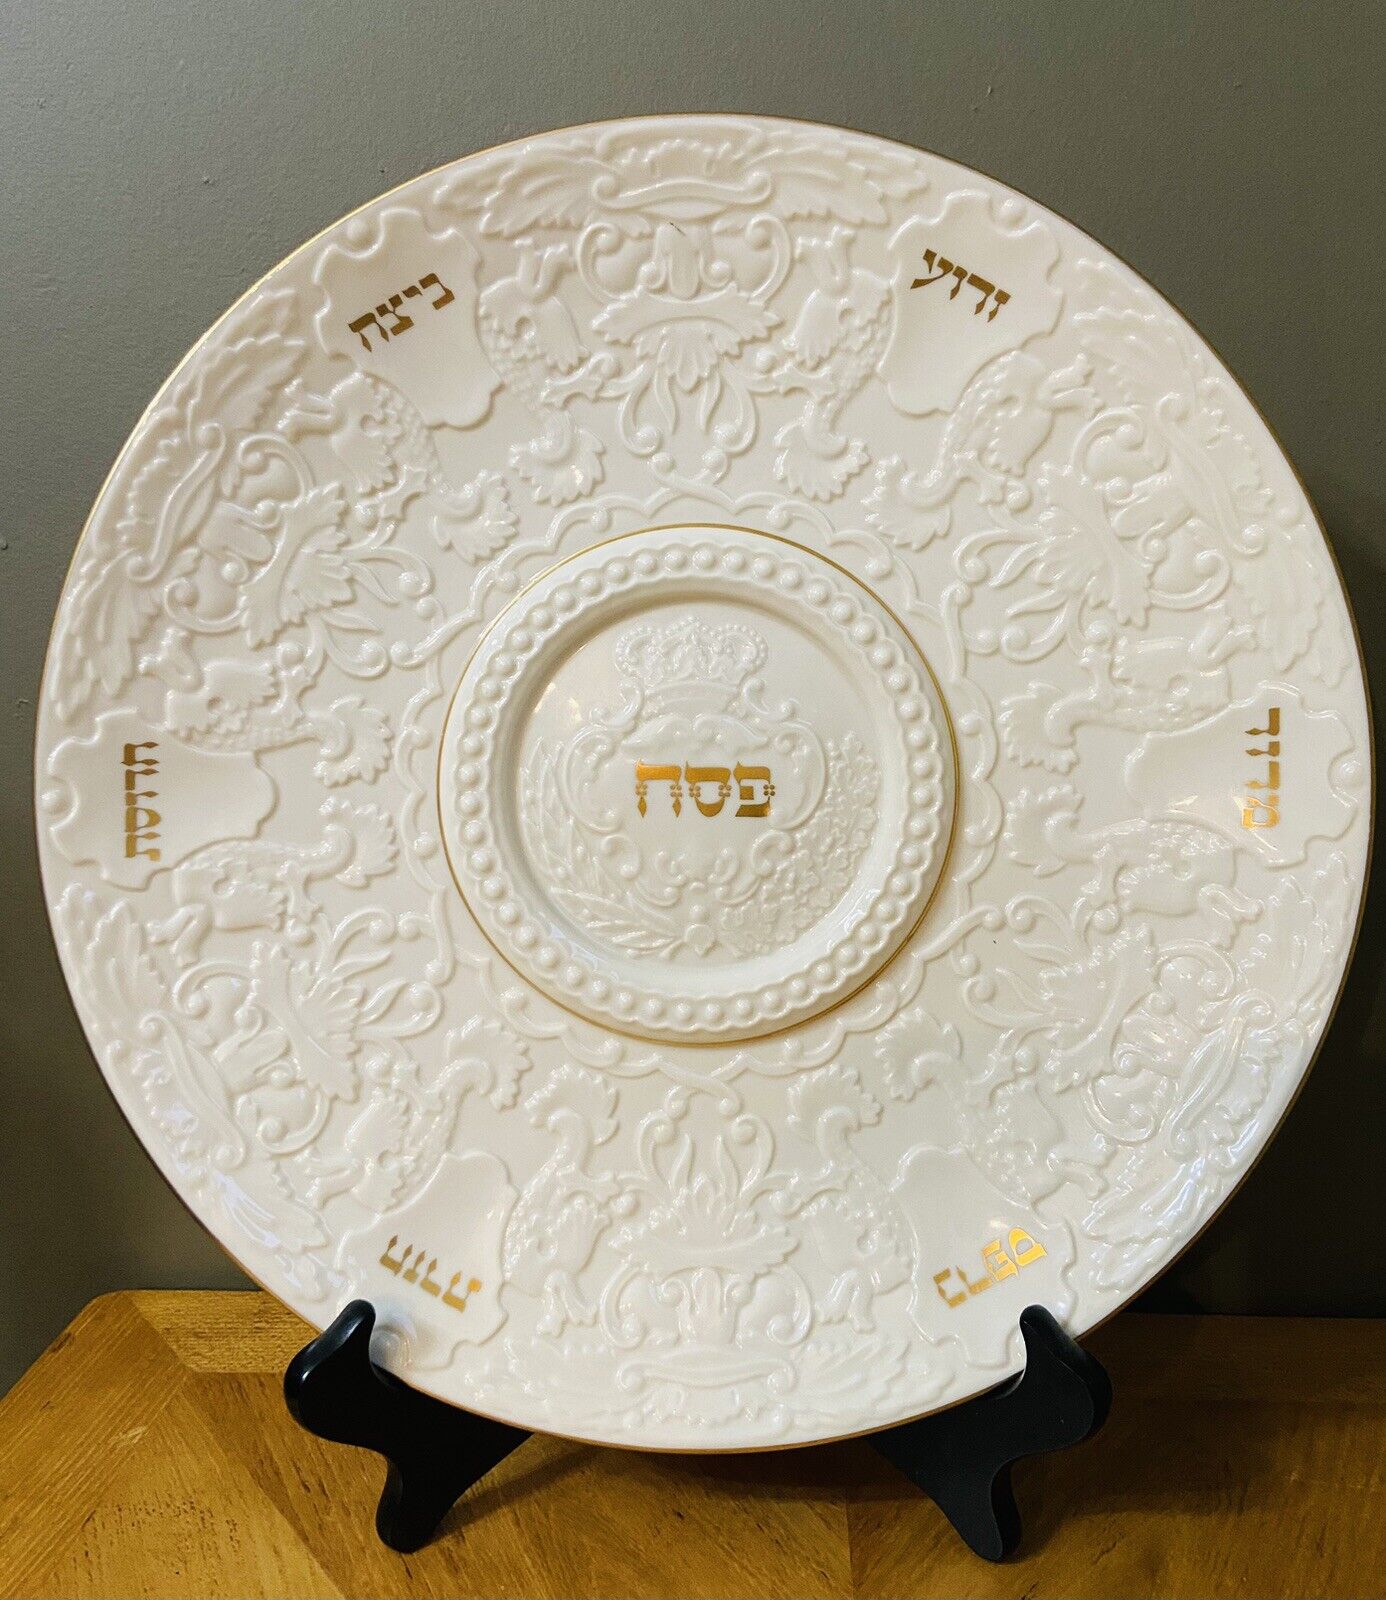 Lenox Passover Seder Plate Gold Trim Adapted 19th Century Vintage $137 Tag On It